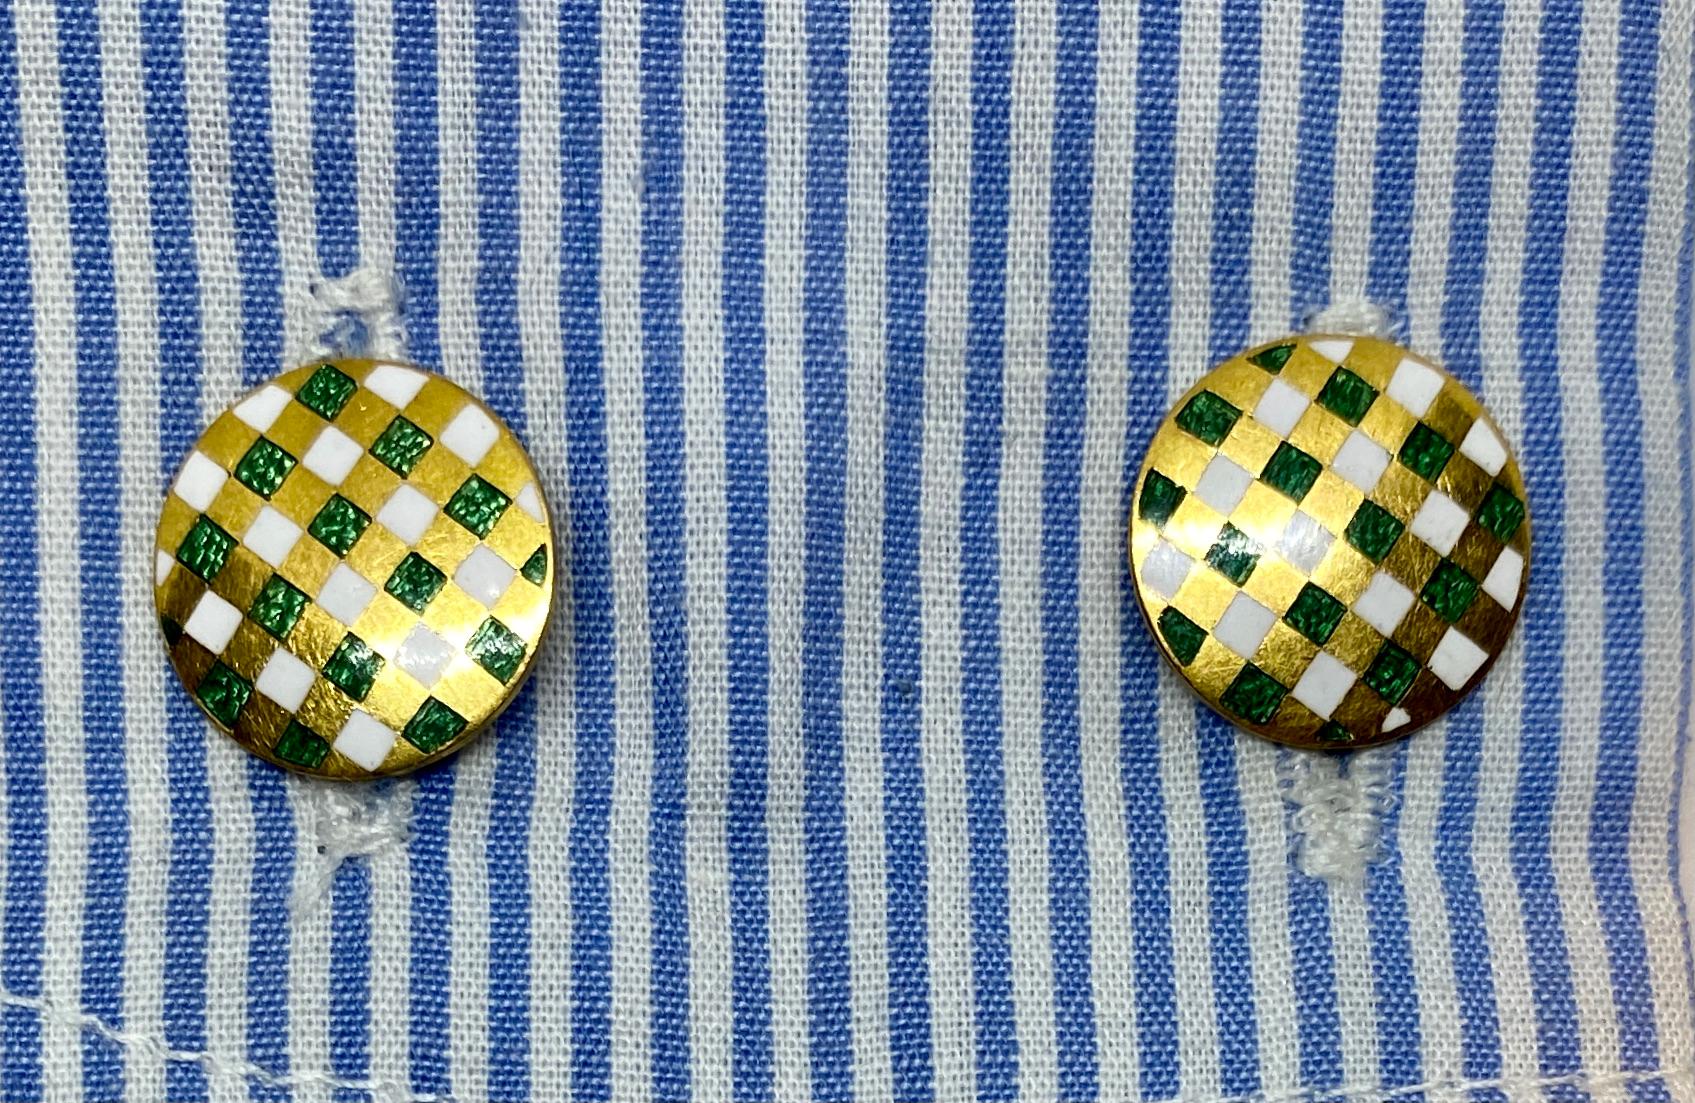 18 Karat Yellow Gold Cufflinks with Checkered Green and White Enamel In Good Condition For Sale In San Rafael, CA